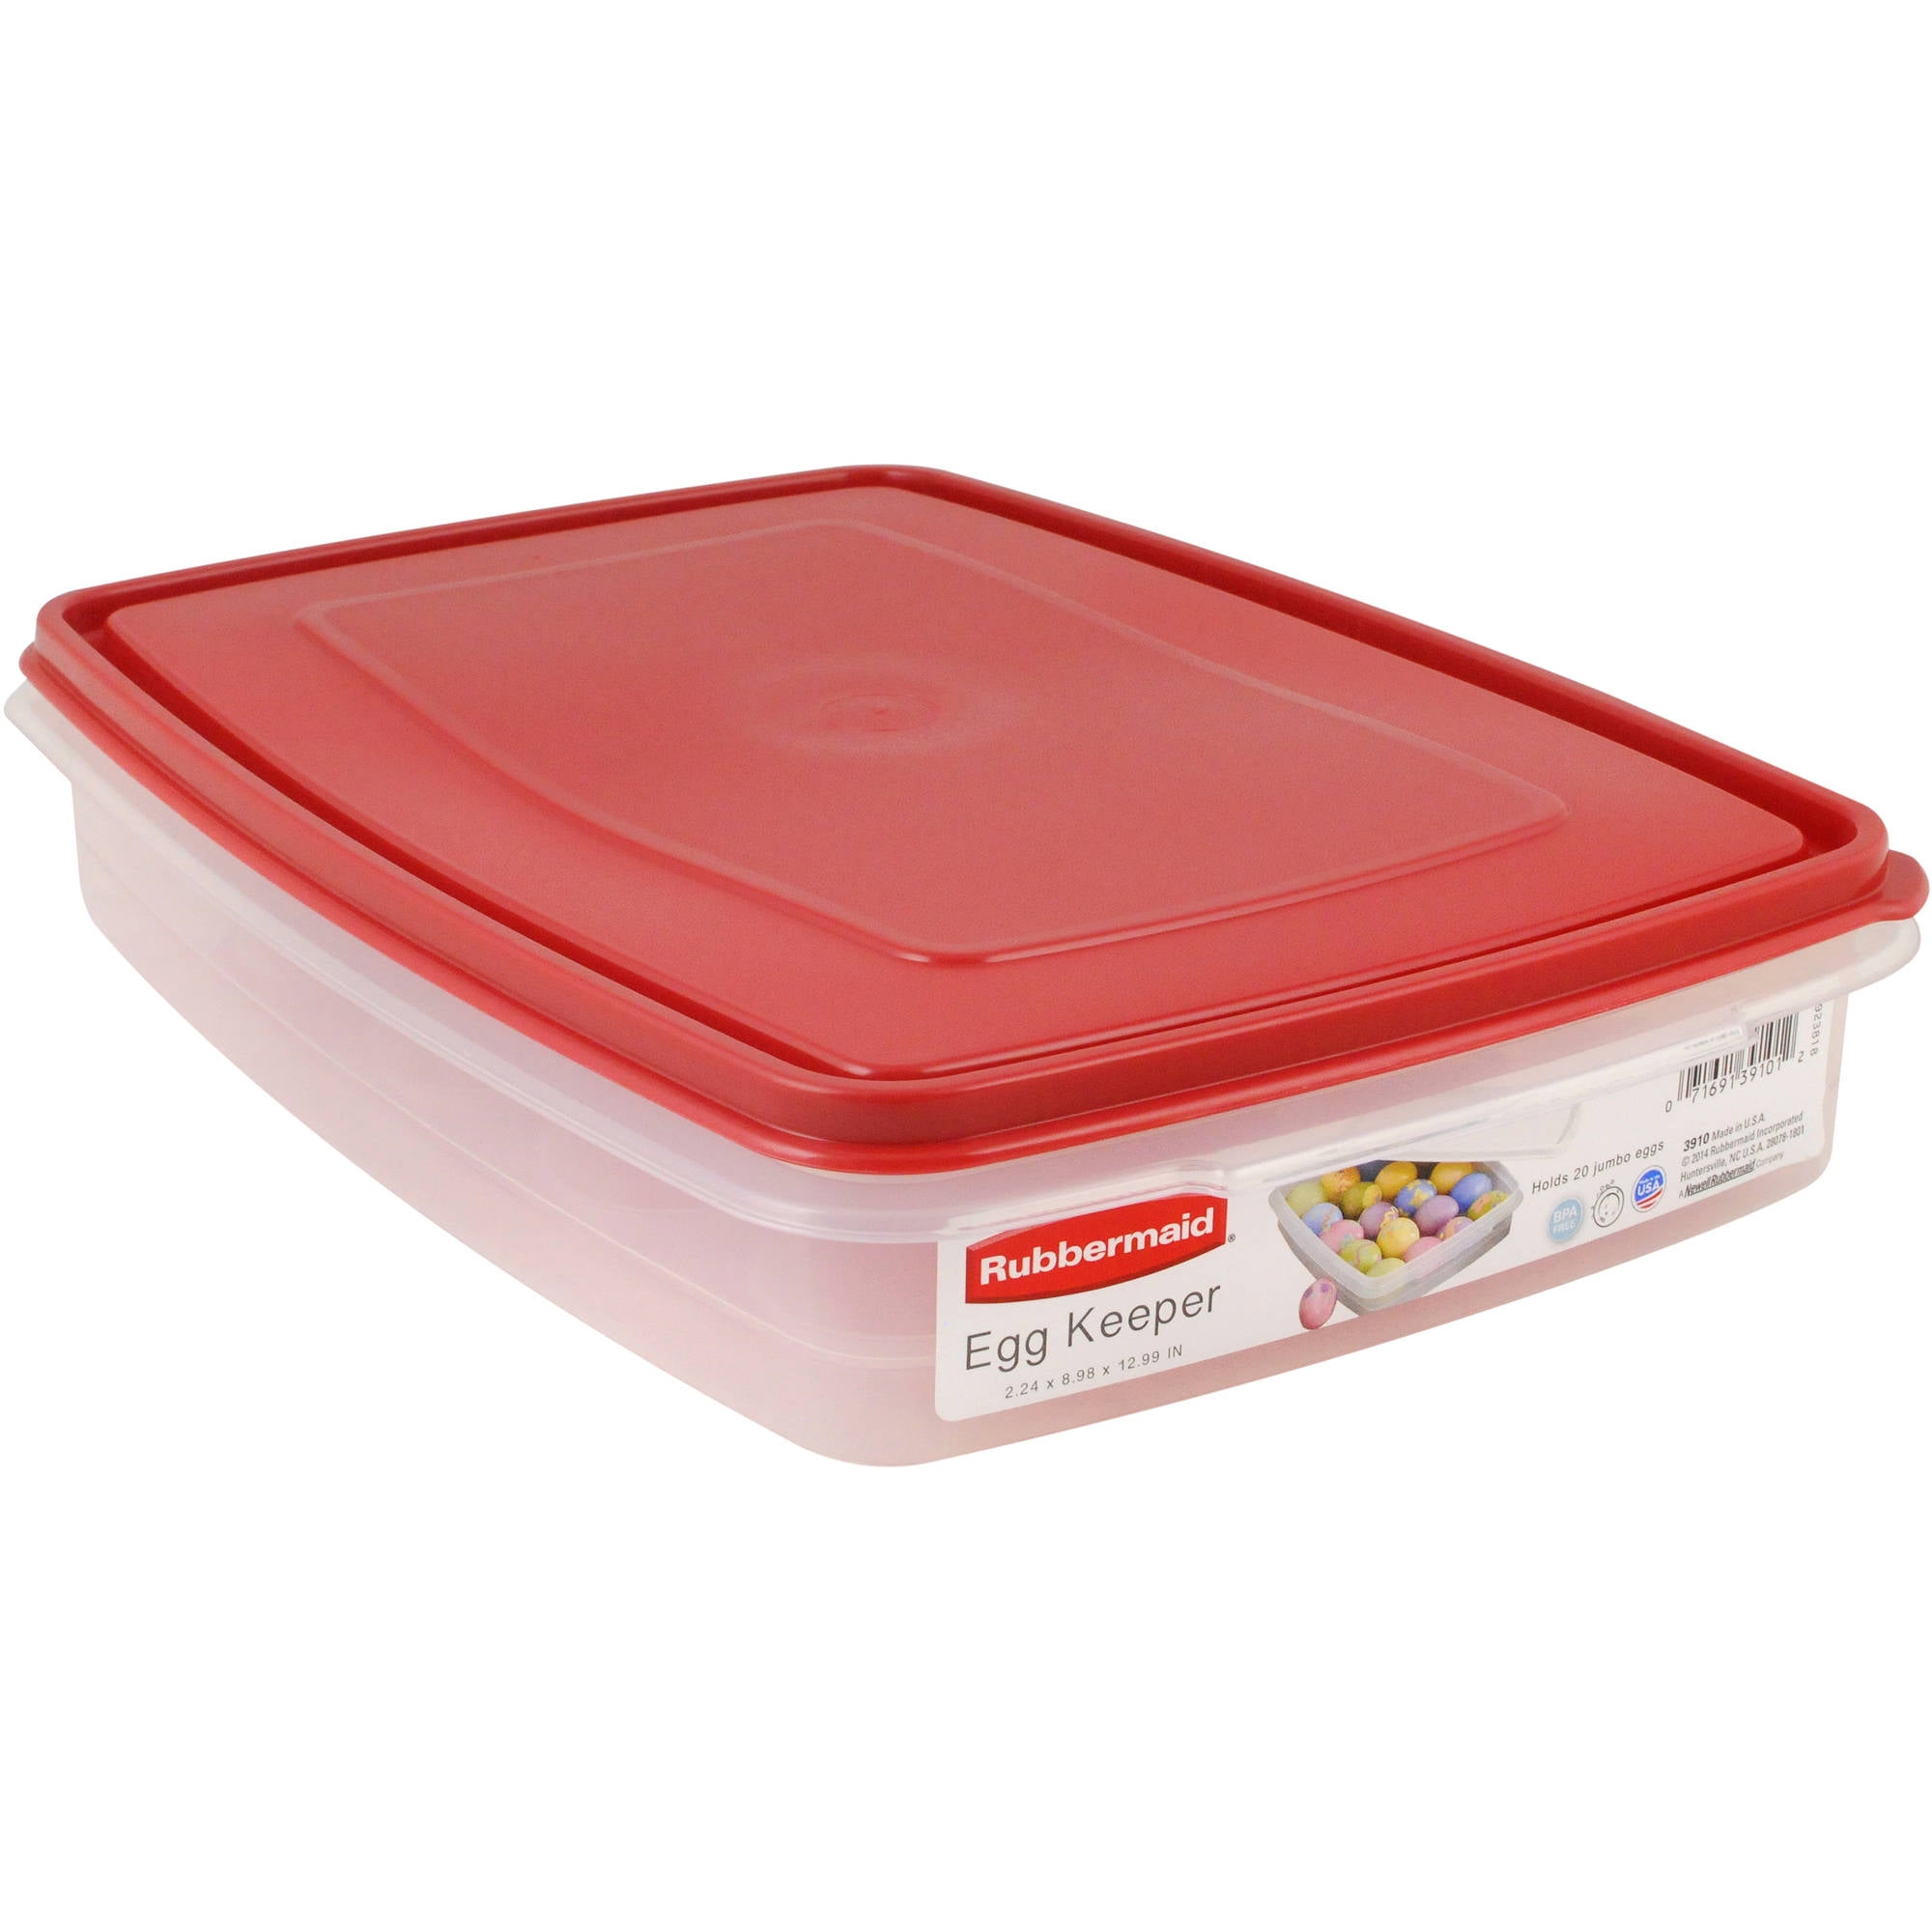 Rubbermaid Egg Food Storage Container, Red color